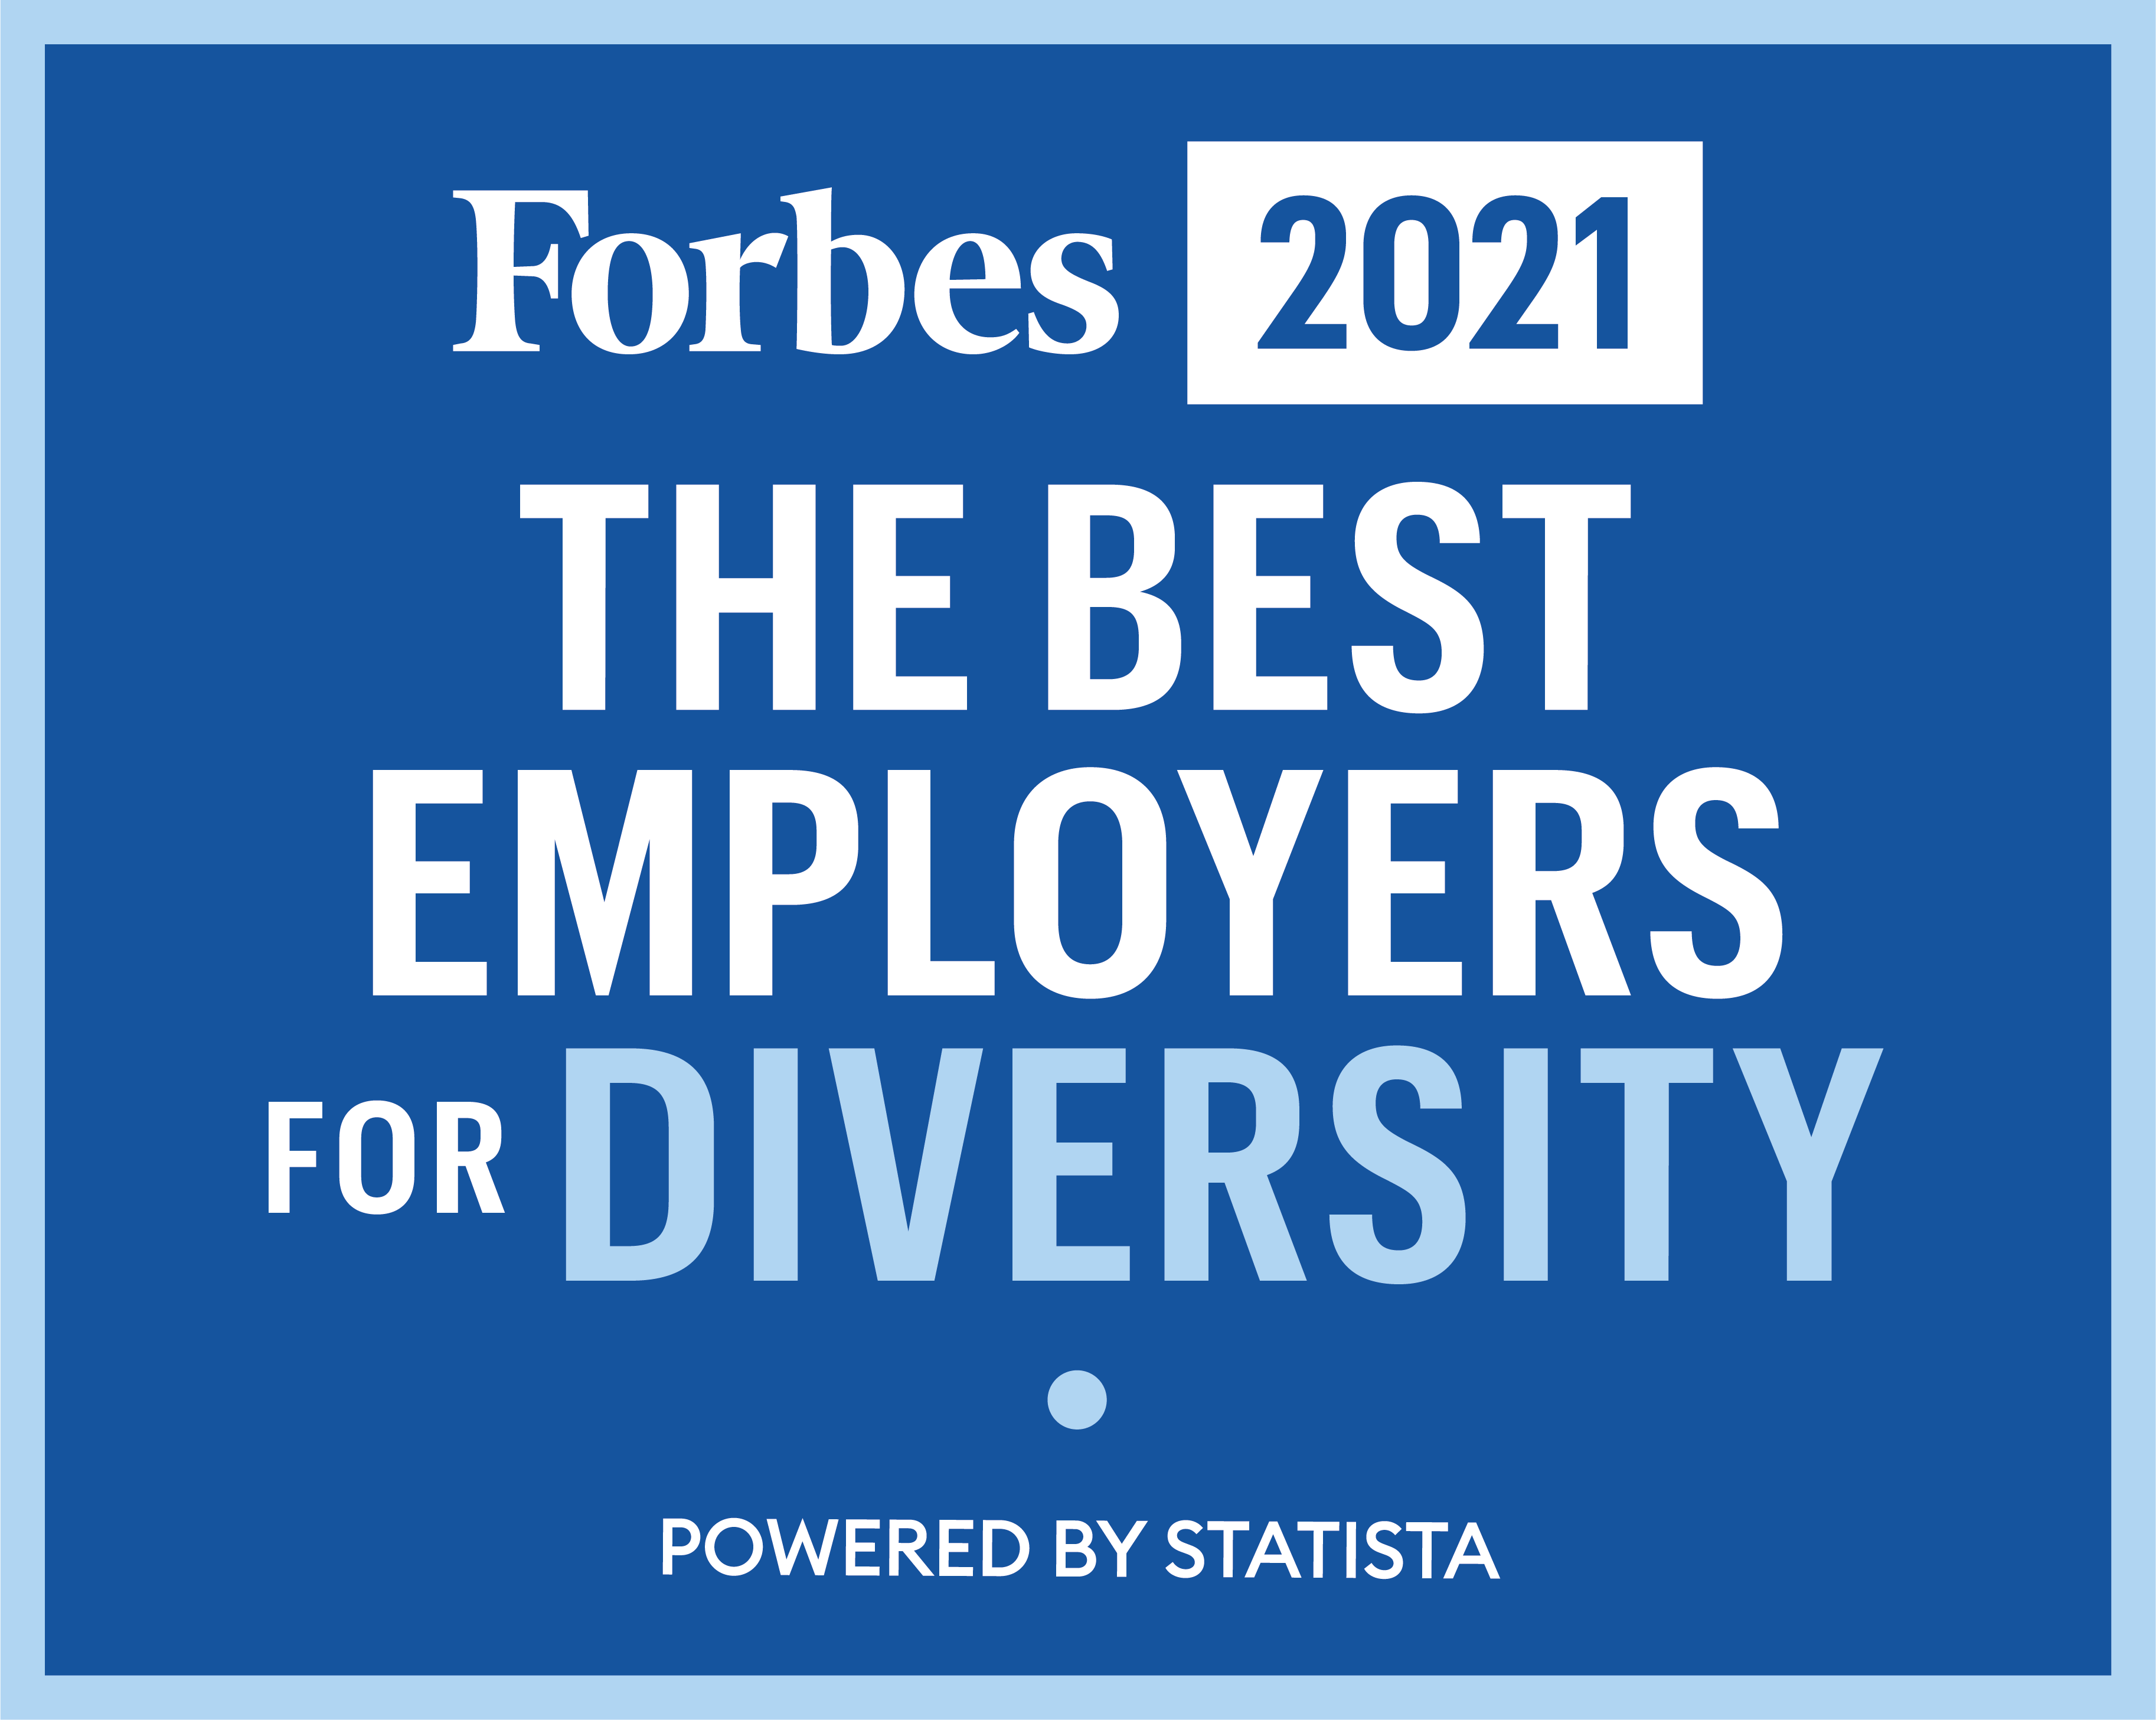 Forbes 2021 The Best Employers for Diversity Award